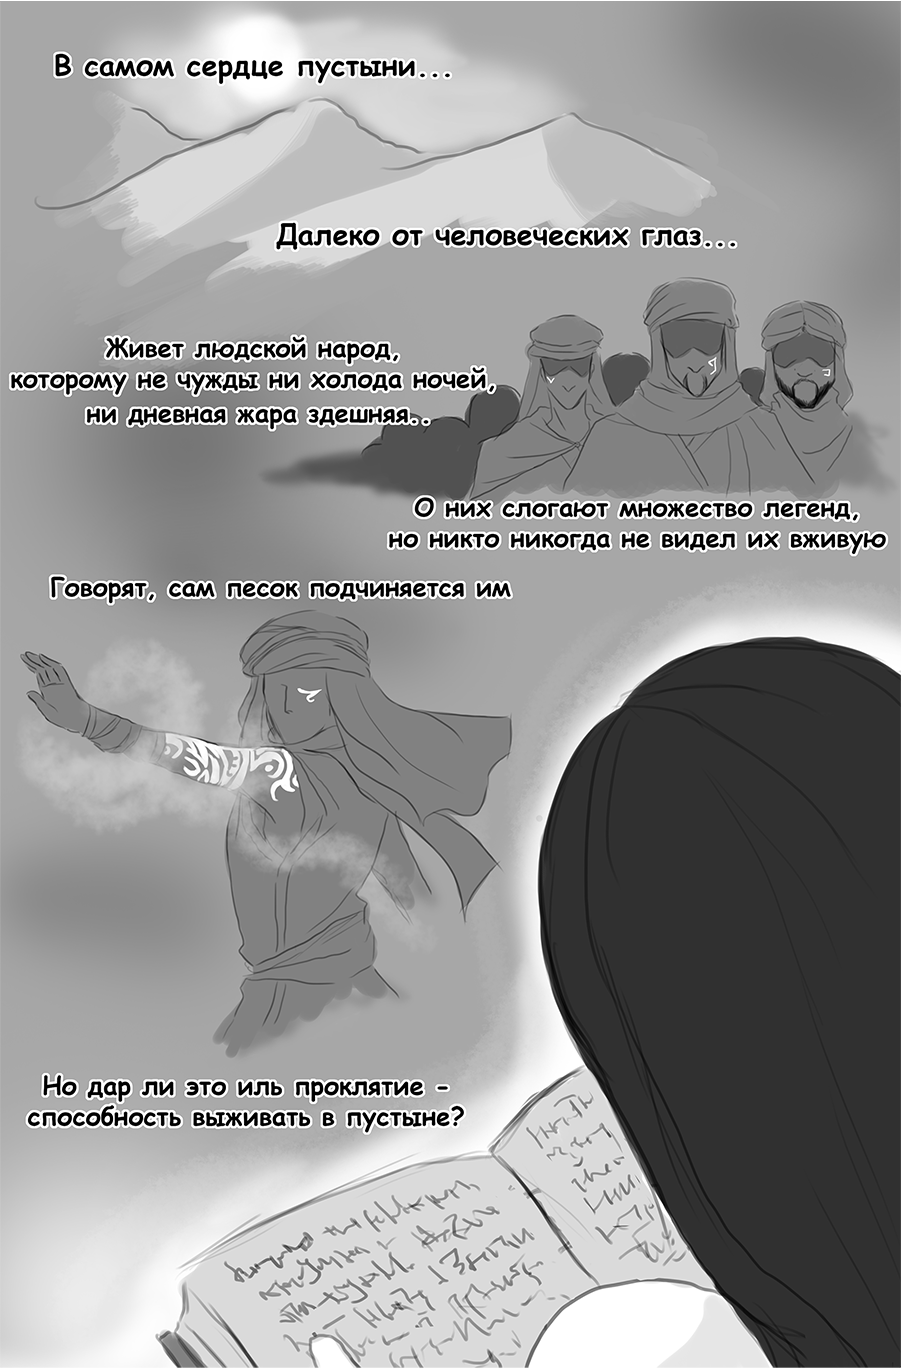 Legend among the Sands - Page 1